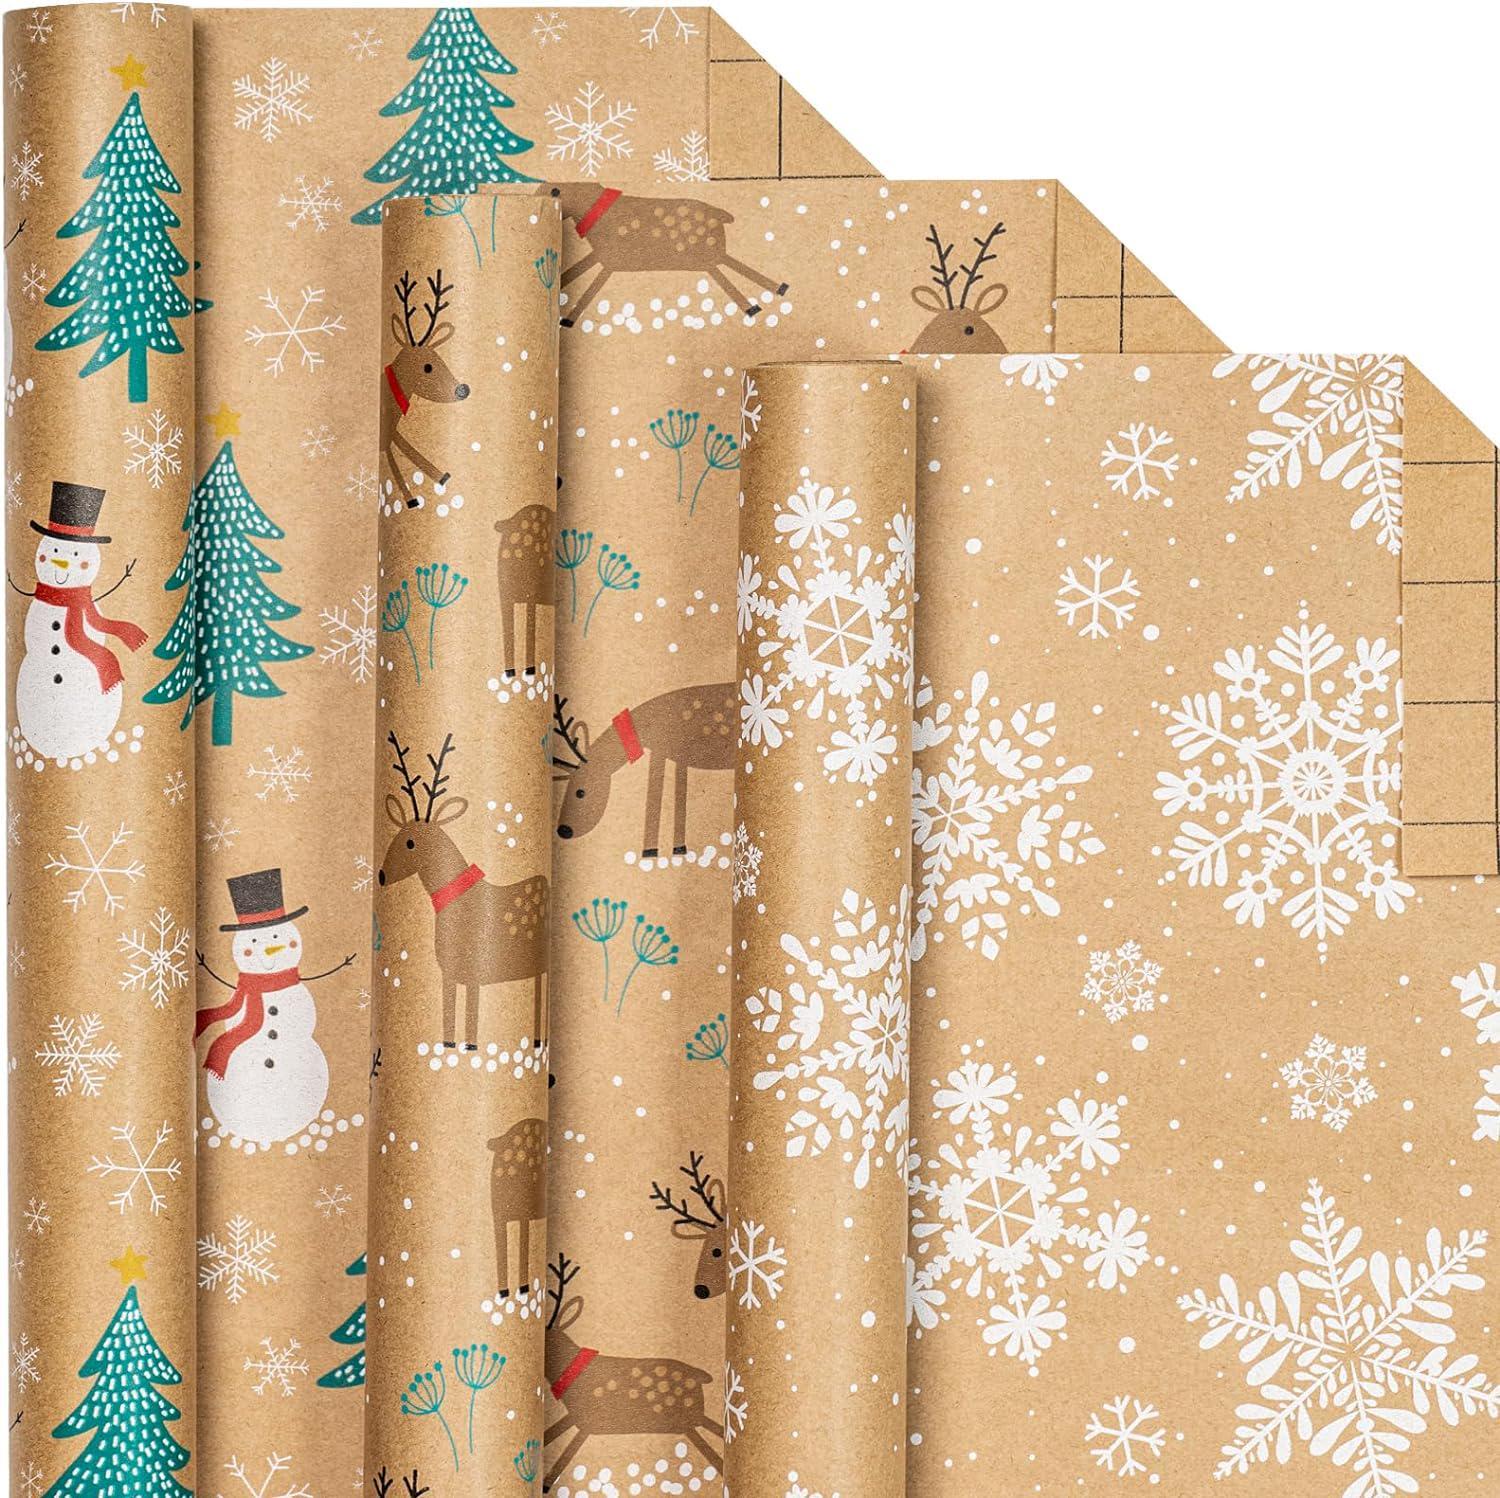 LeZakaa Christmas Kraft Wrapping Paper - Mini Roll -  Nutcracker/Rhombus/Decorative Pattern for Holiday Gift Wrap, Arts Crafts -  17 x 120 inches - 3